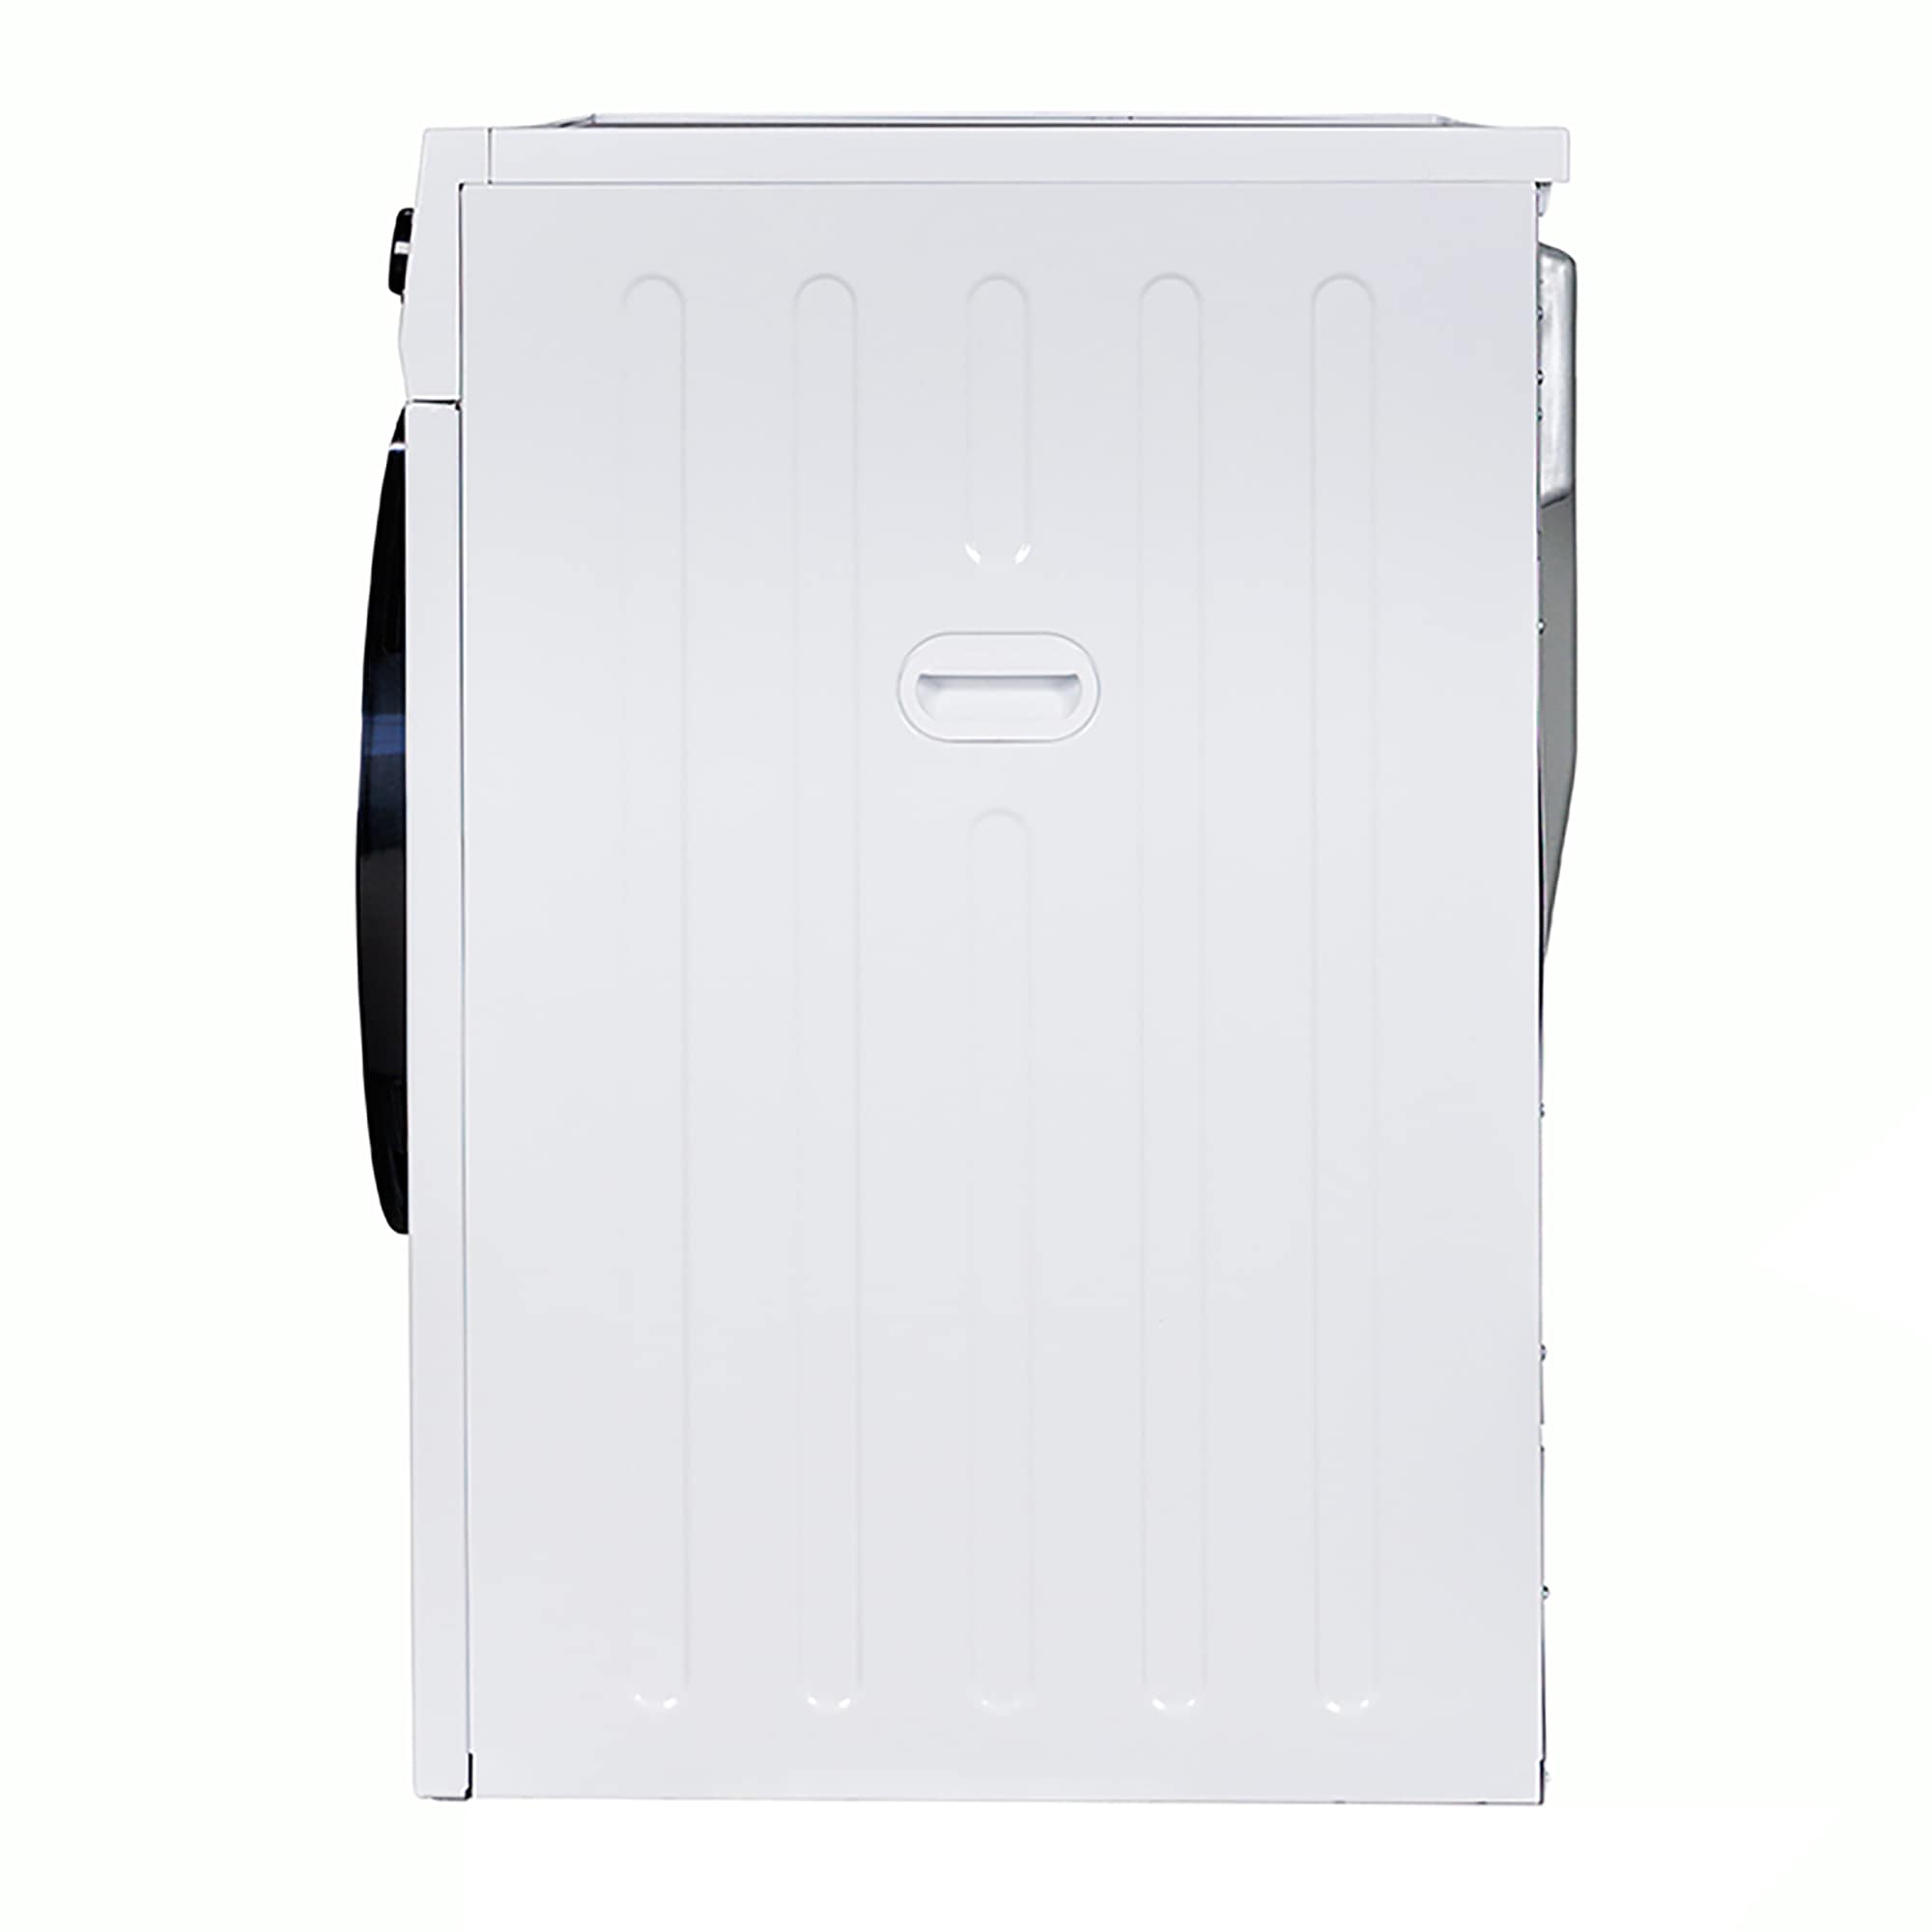 GE 3.6-cu ft Stackable Portable Electric Dryer (White On White)